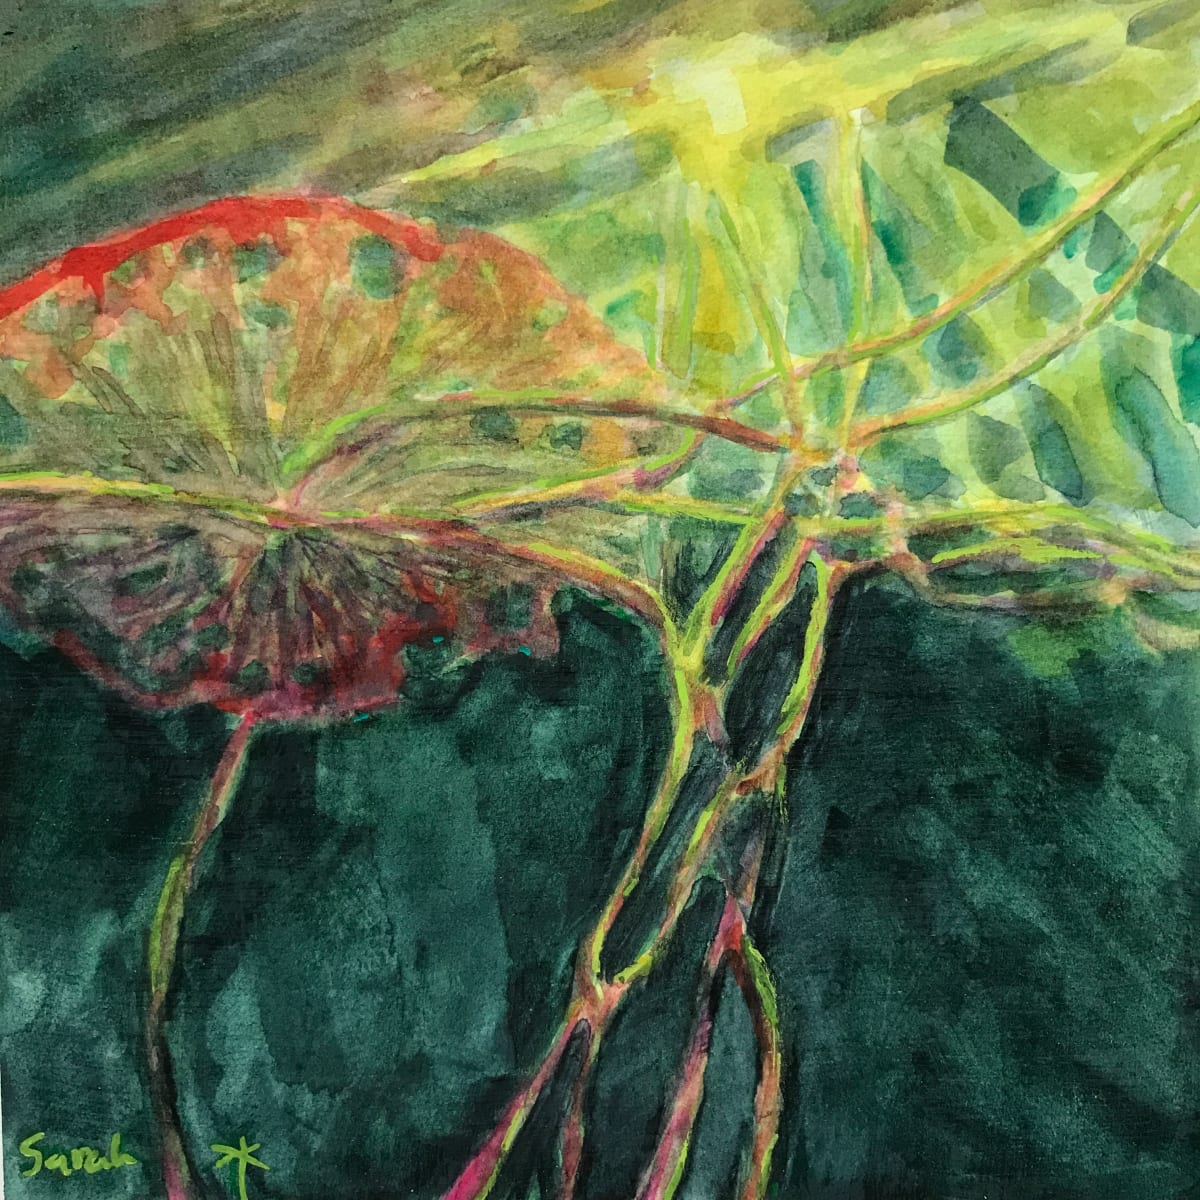 Waterlily from Below by Sarah Robinson 